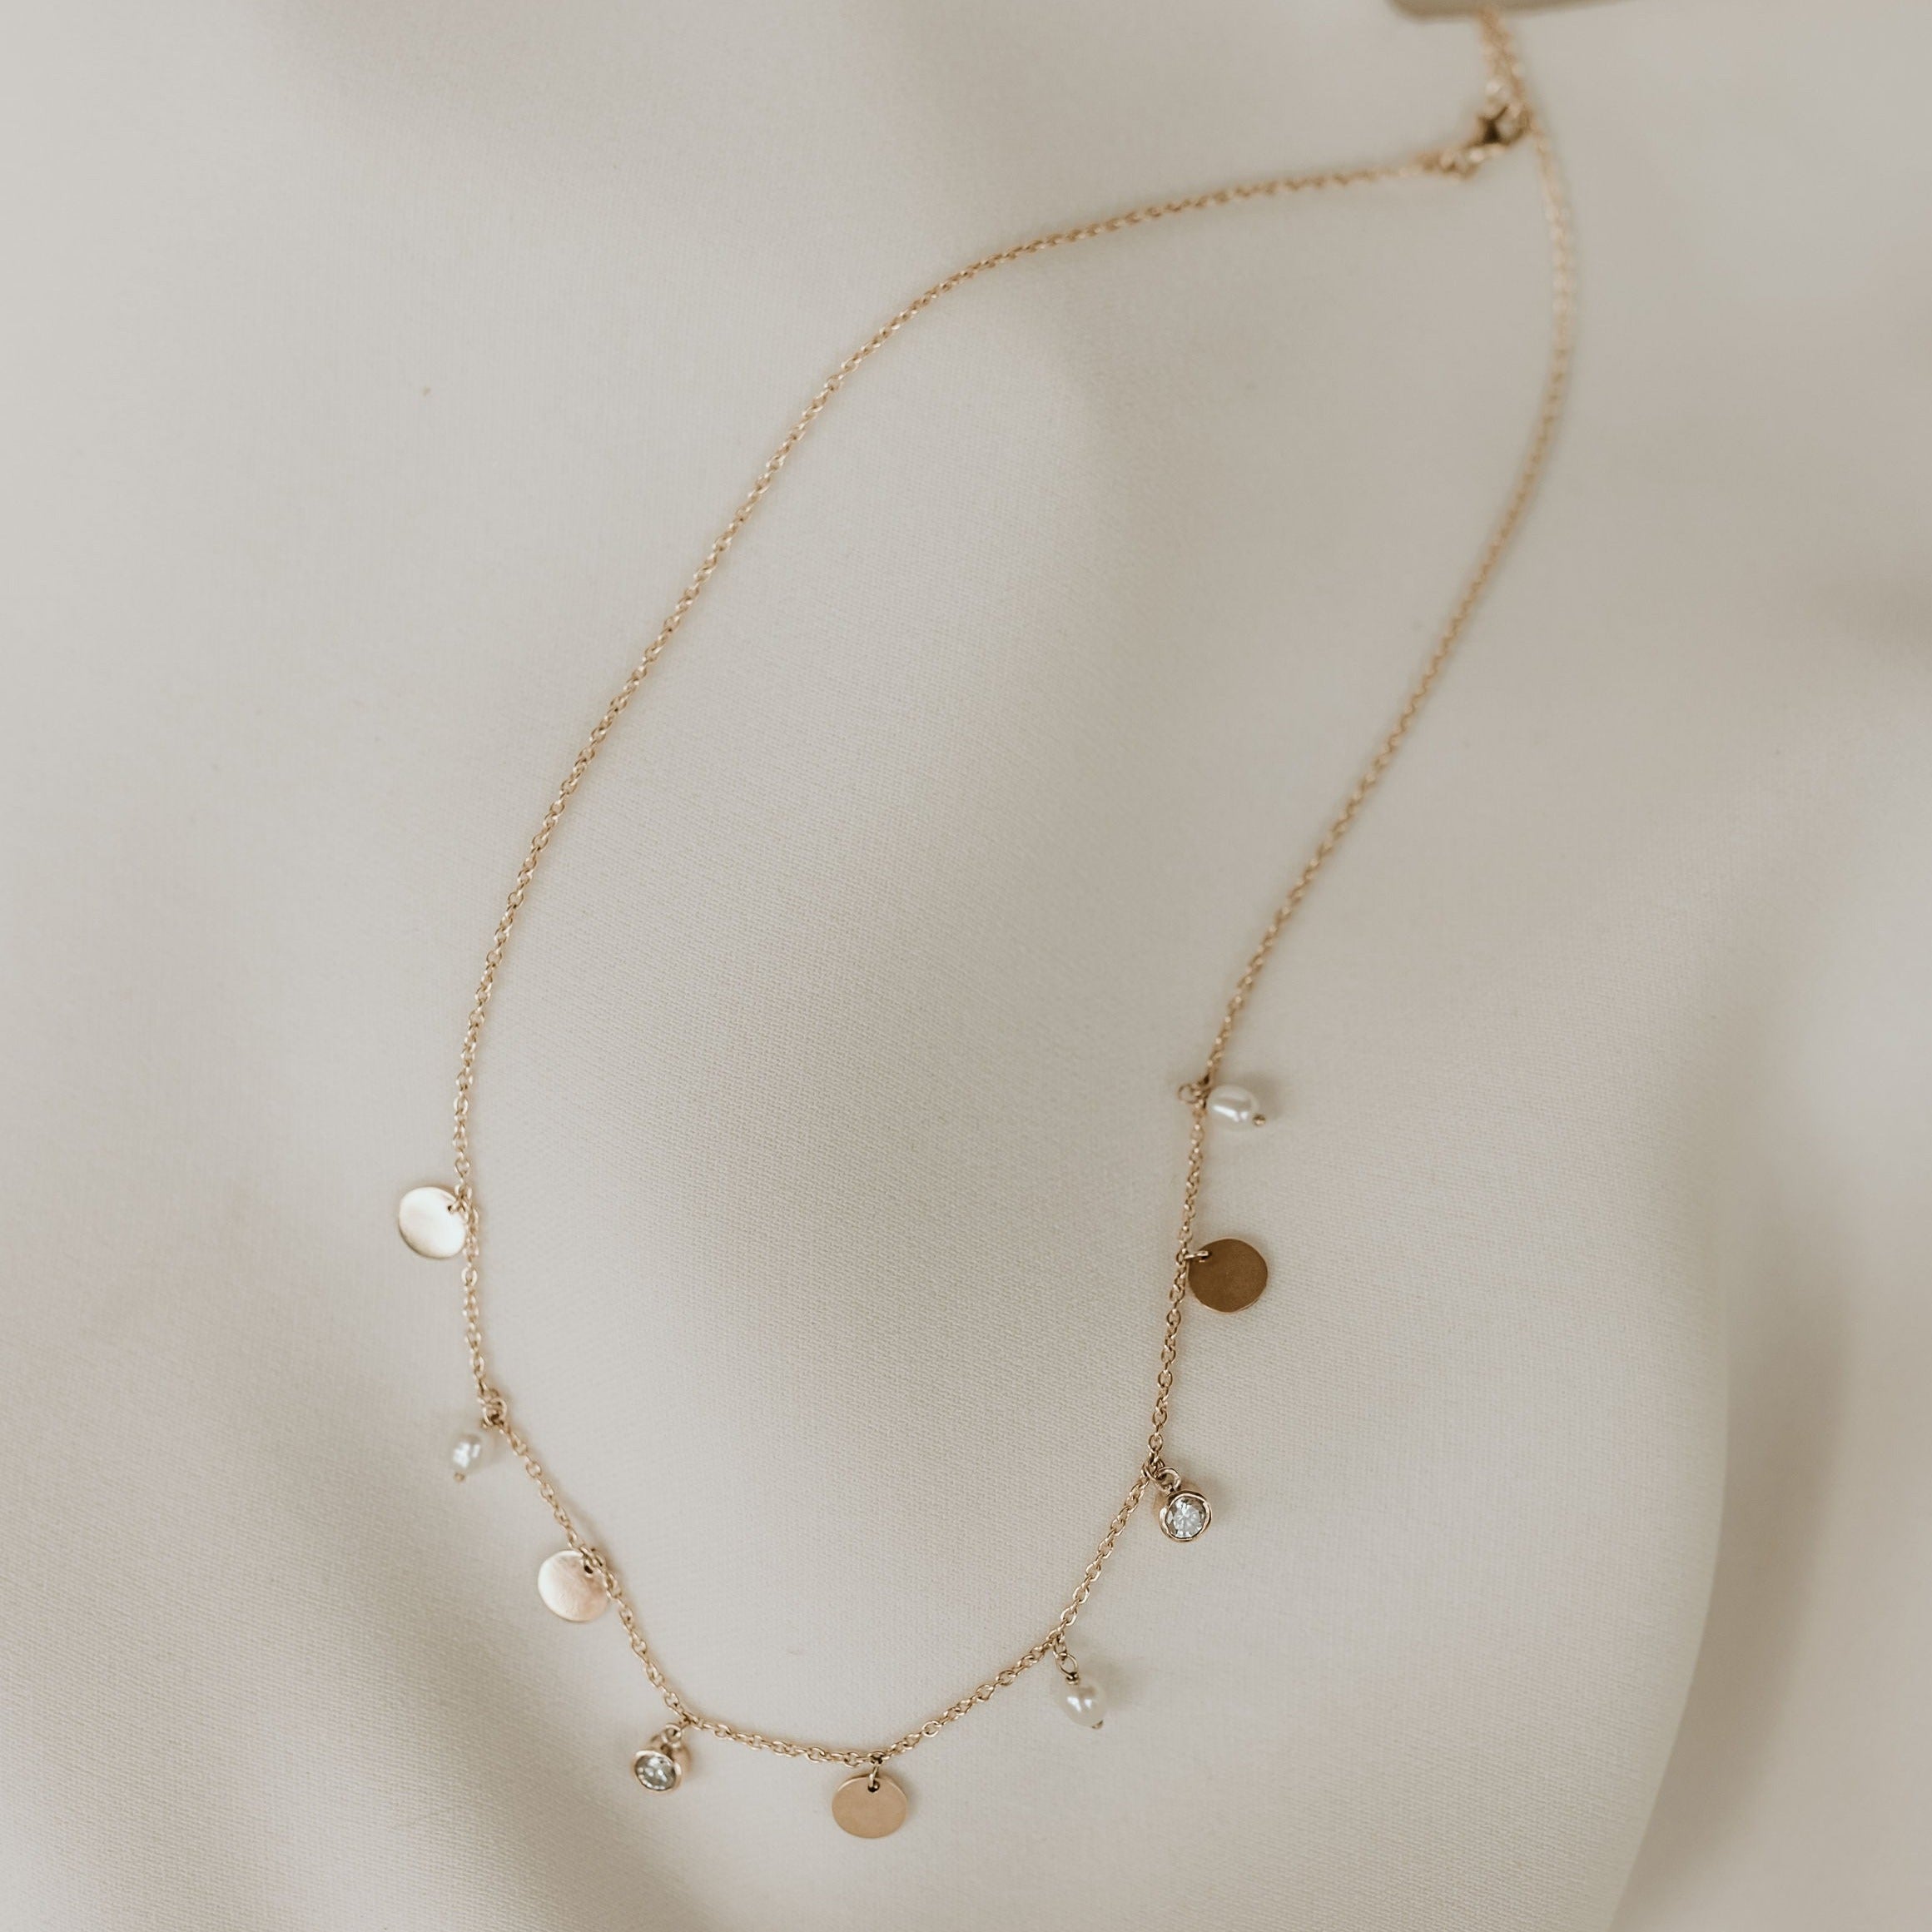 18ct yellow gold multi-charm necklace, customised with diamonds and pearls.